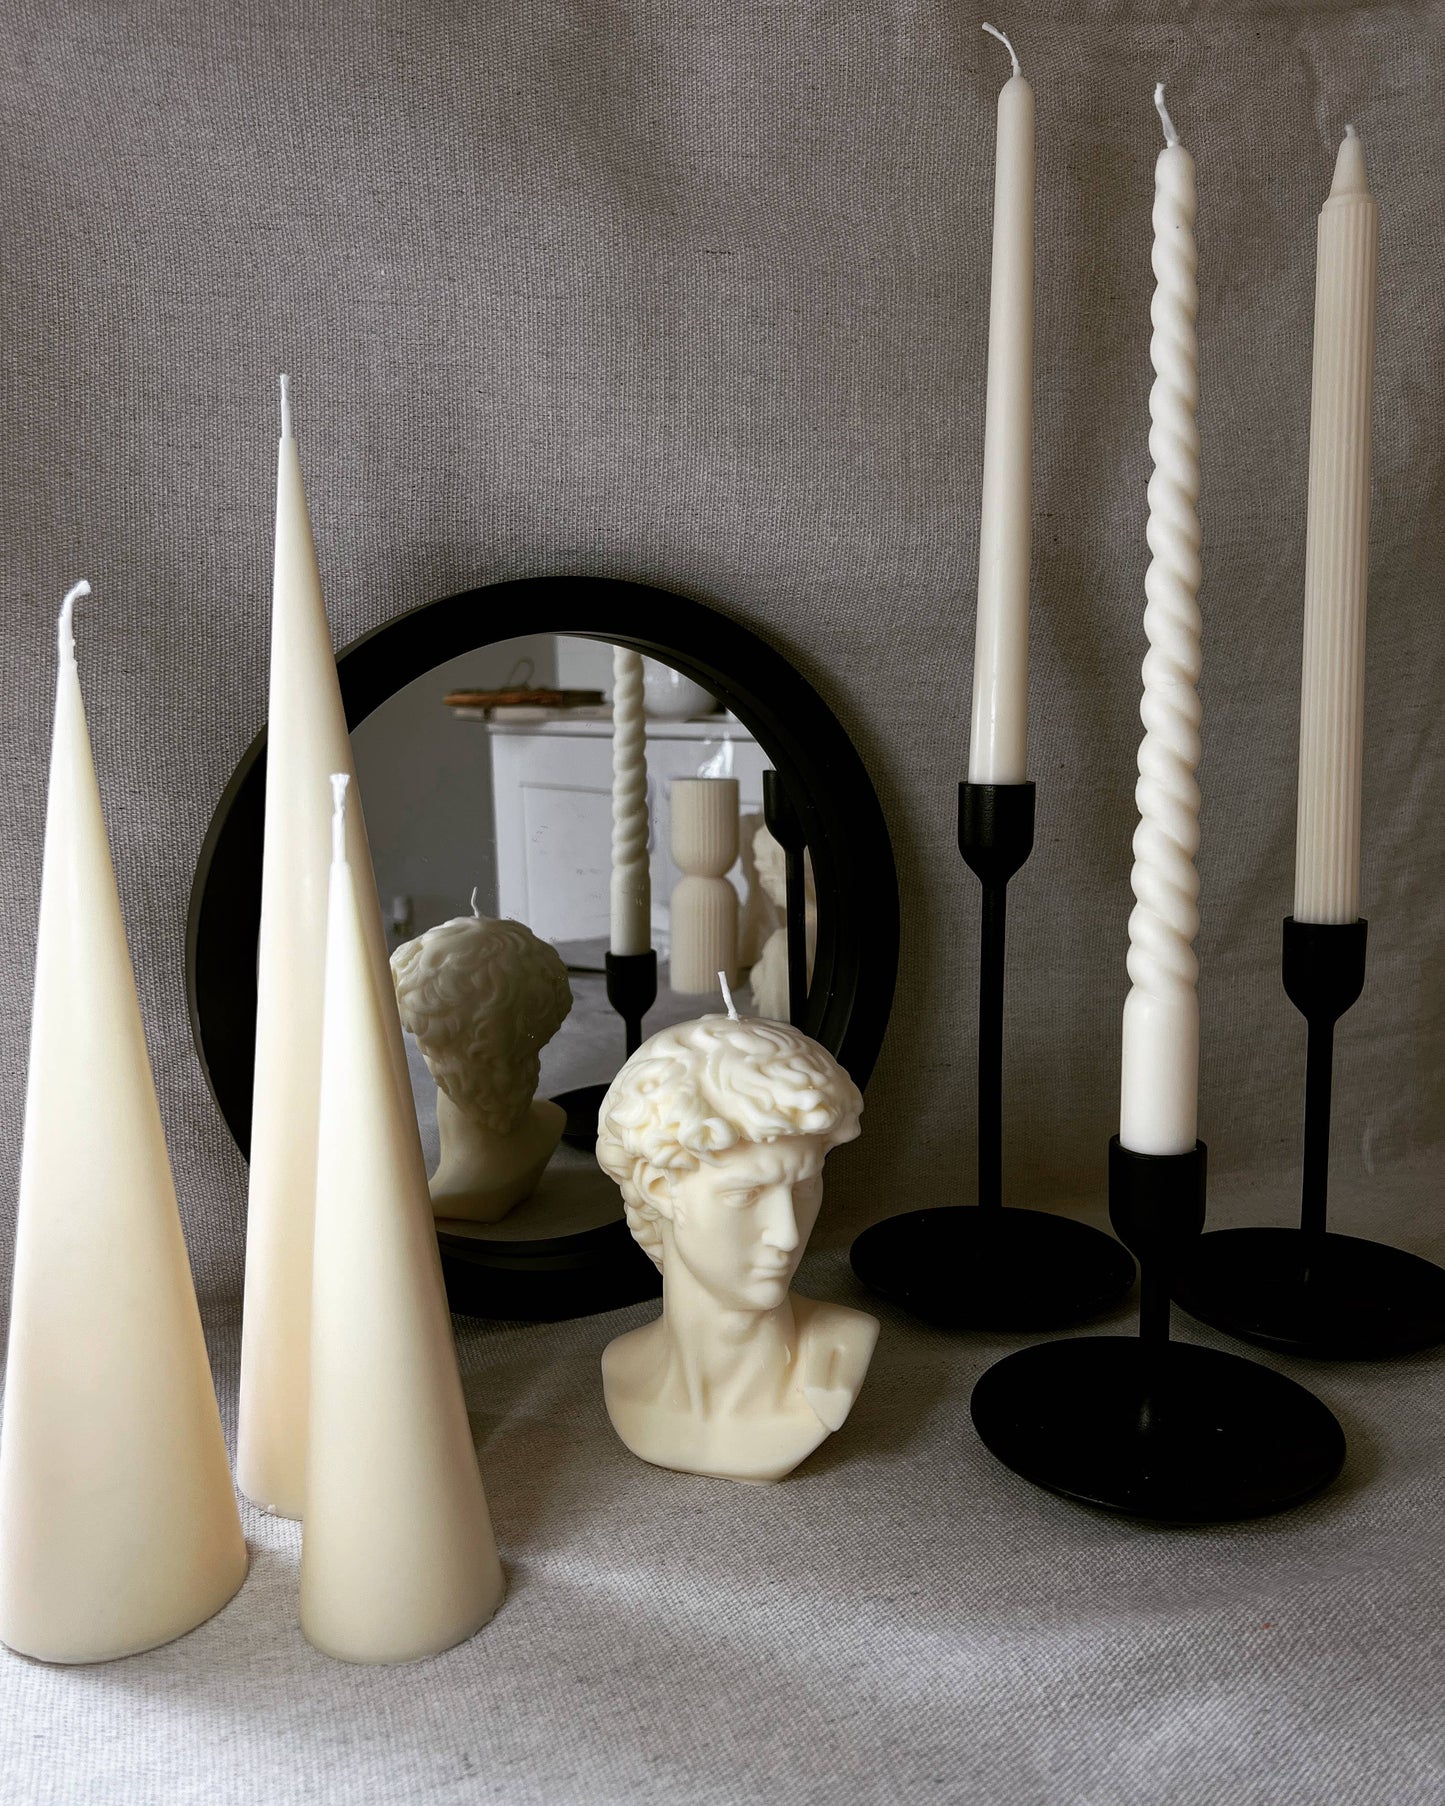 Spire Cone Candle -Set of 3